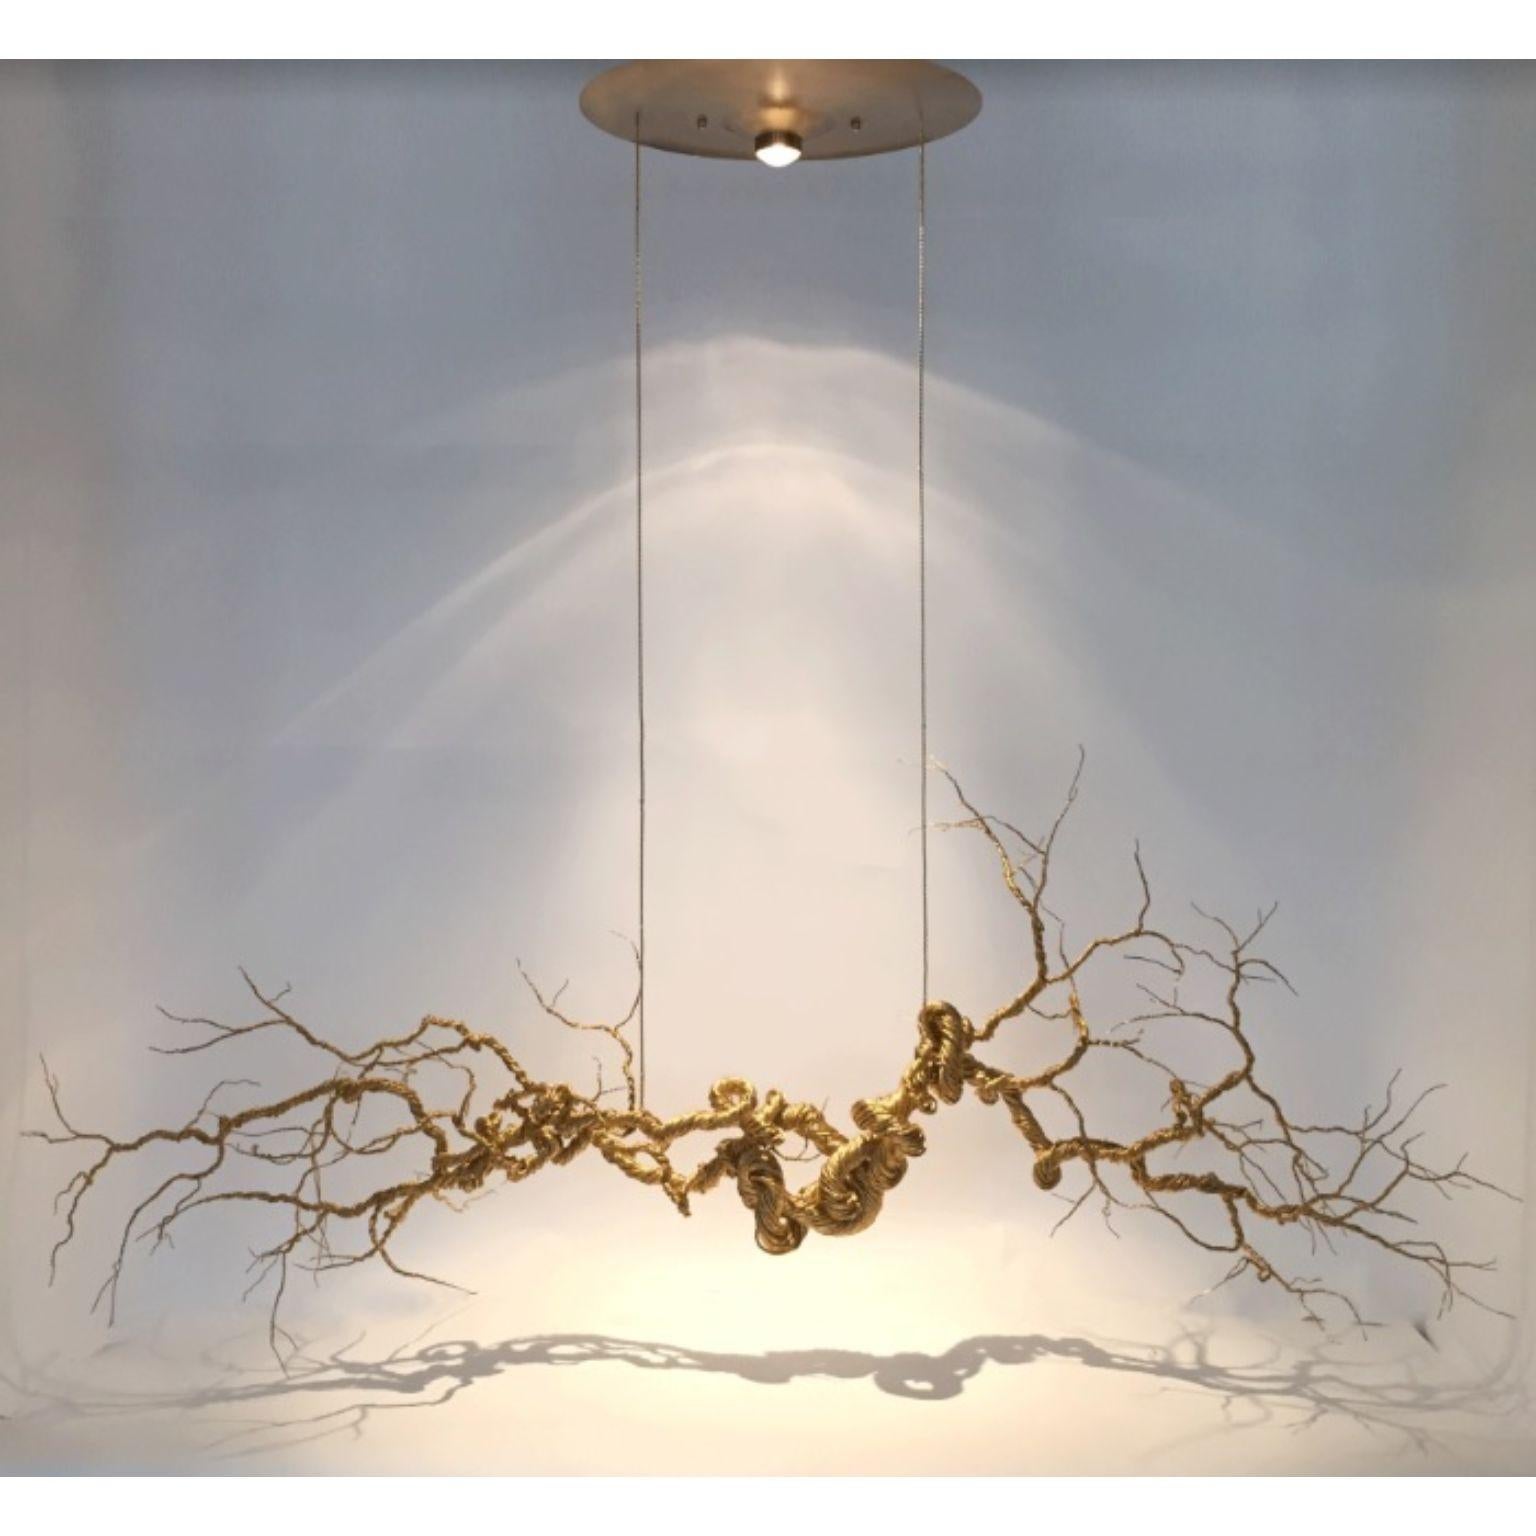 Dendrite chandelier by Mary Brogger
Unique piece. 
Dimensions: D 46 x W 152.5 x H 142.5 cm.
Materials: Twisted brass wire, LED light fixture, brass canopy.
Weight: 11.8 kg.

Each piece is unique and made to order. Sizes and price vary.
A